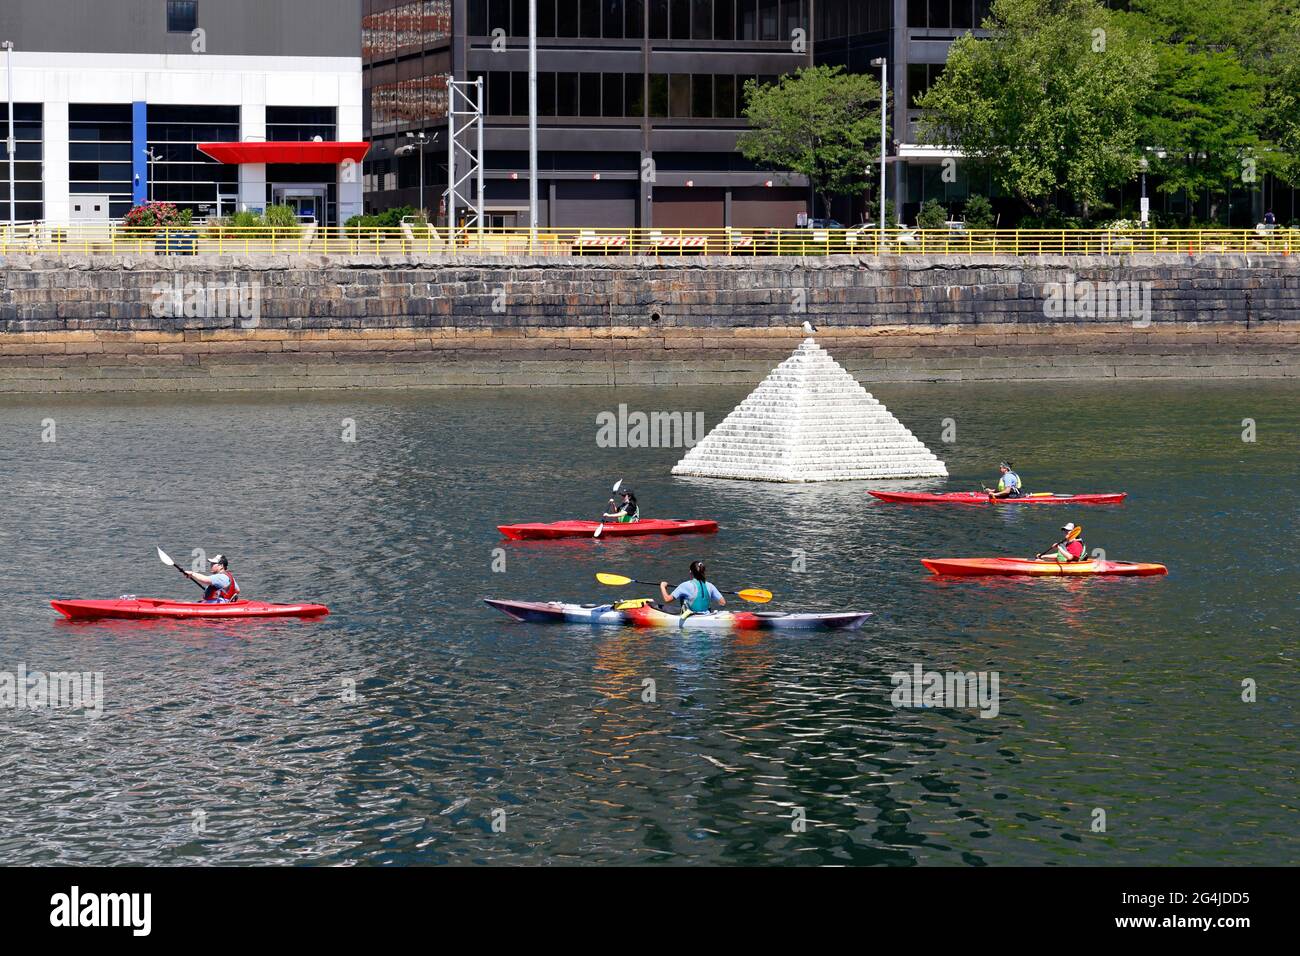 Kayakers in the Fort Point Channel next to the PYR 2014 floating pyramid in Boston, MA. Access to the water through Fort Point Pier, a public kayak la Stock Photo